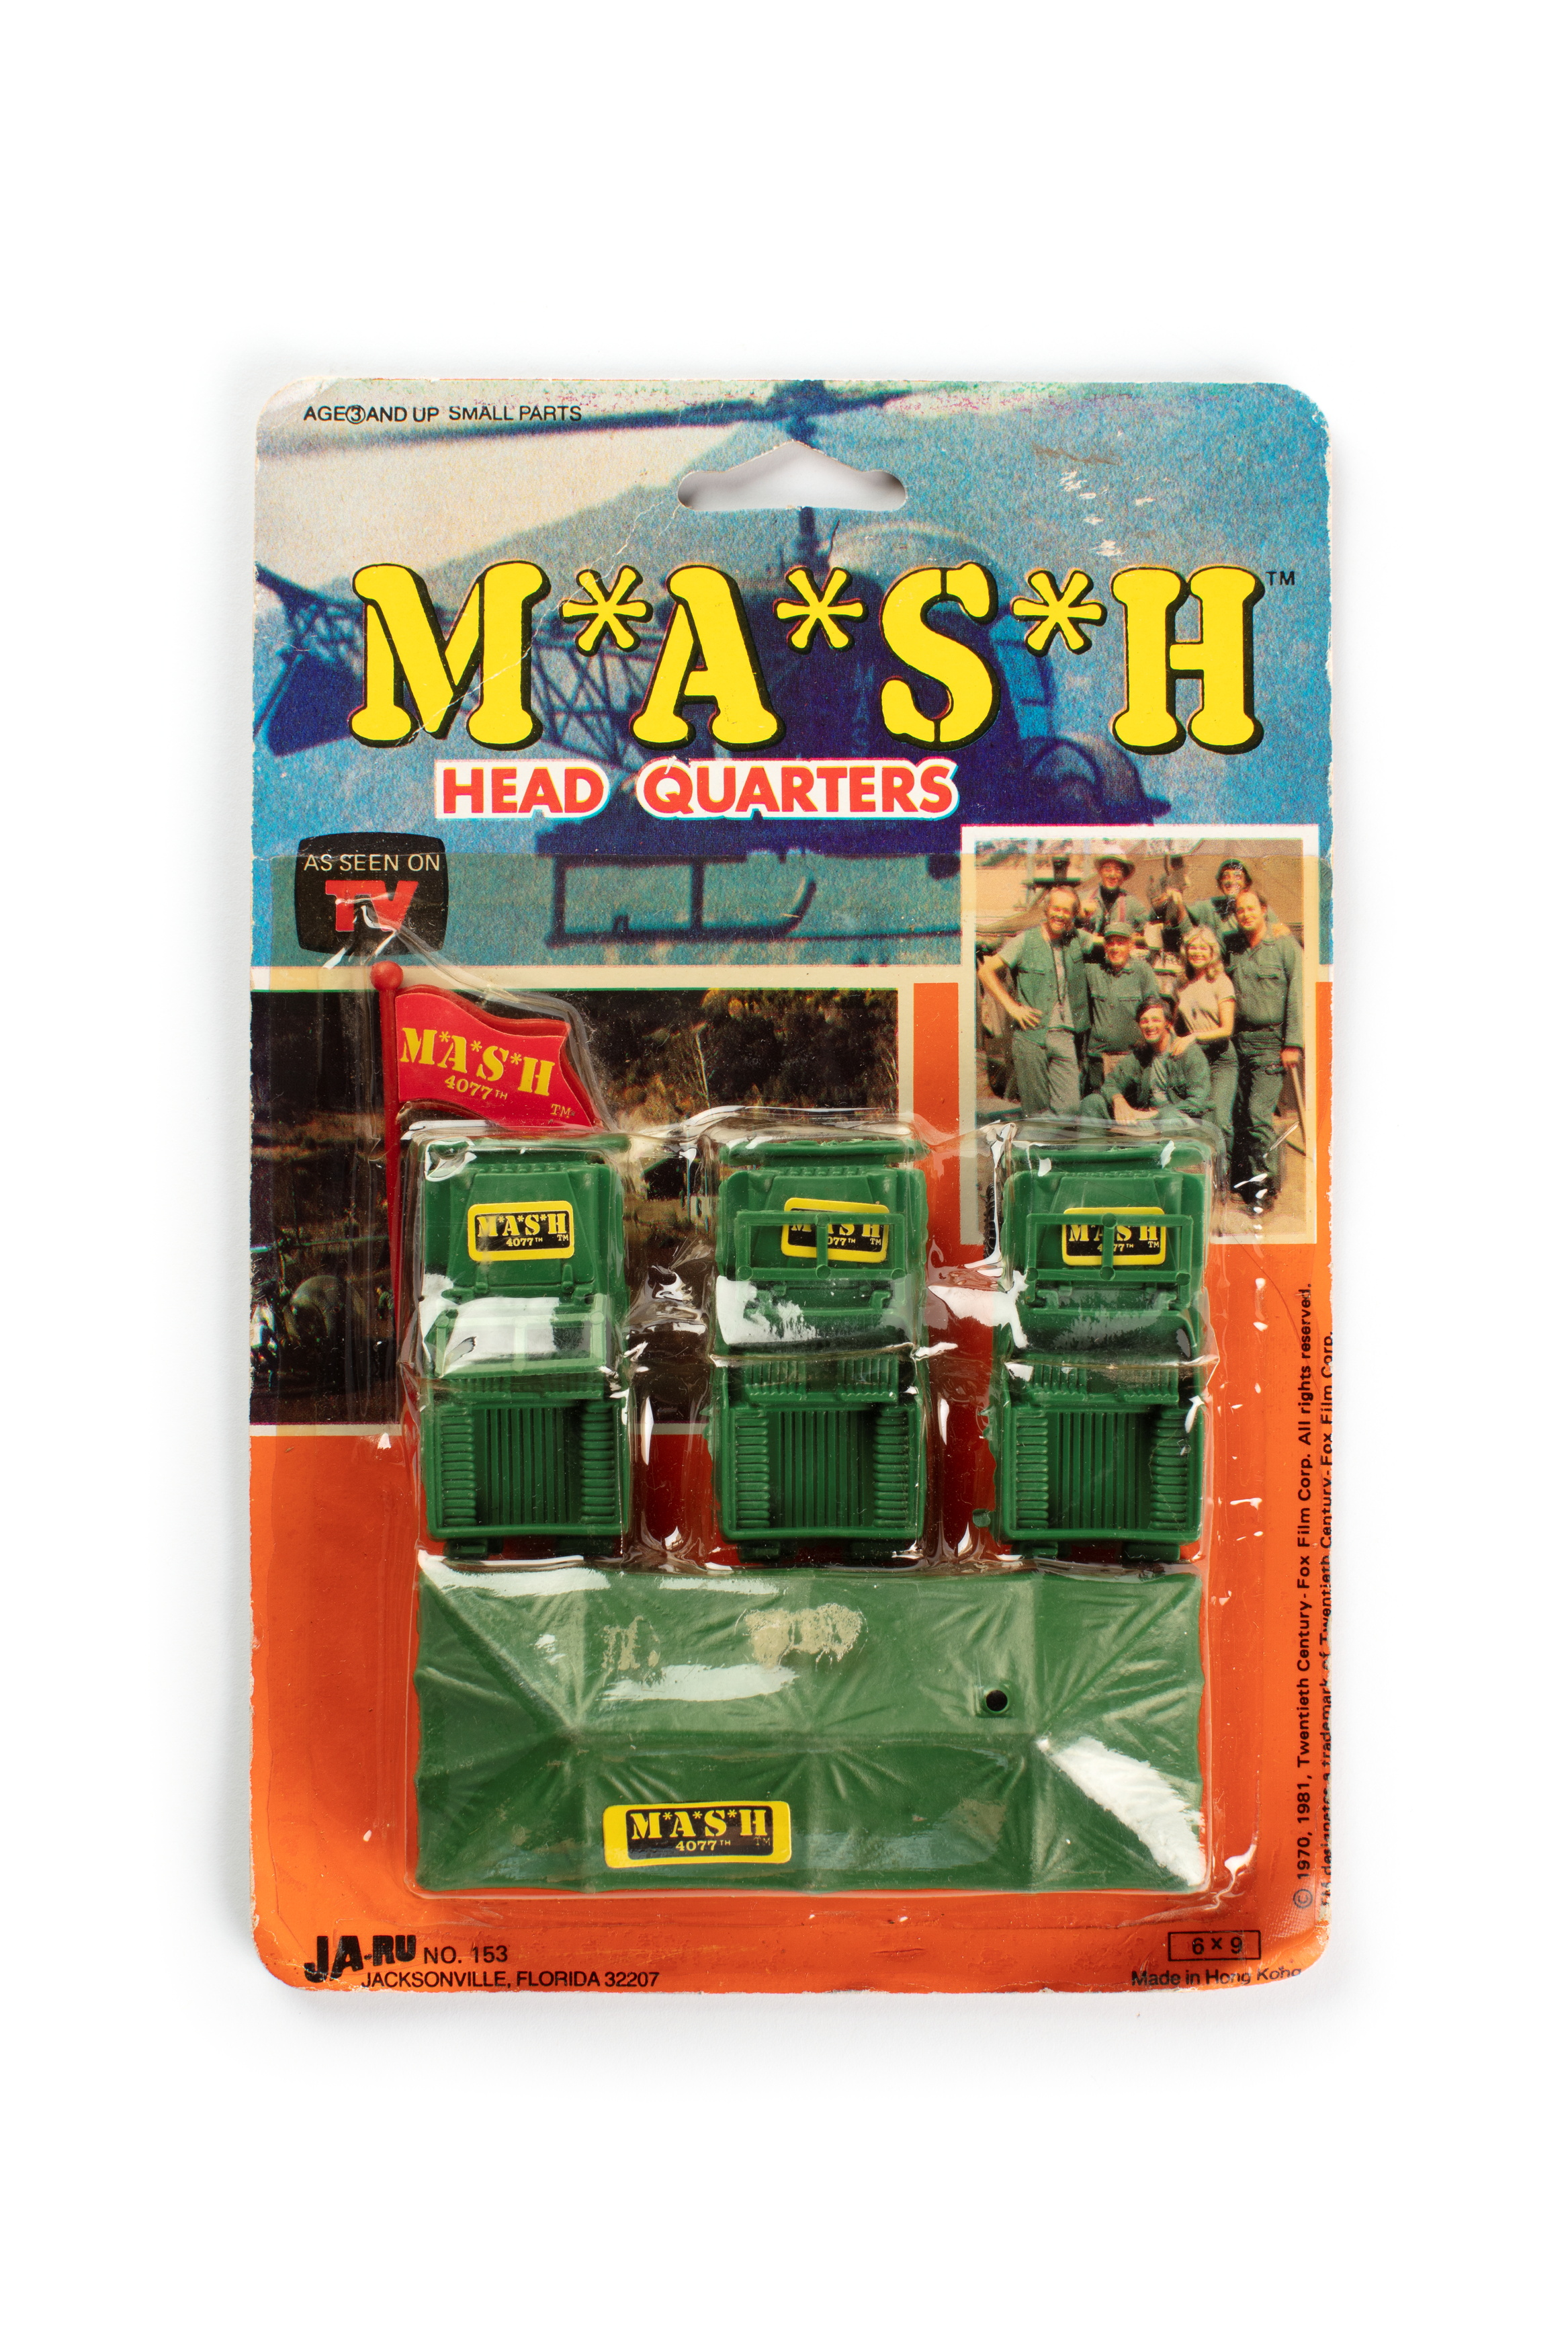 Army head quarters toy from the TV show 'MASH'